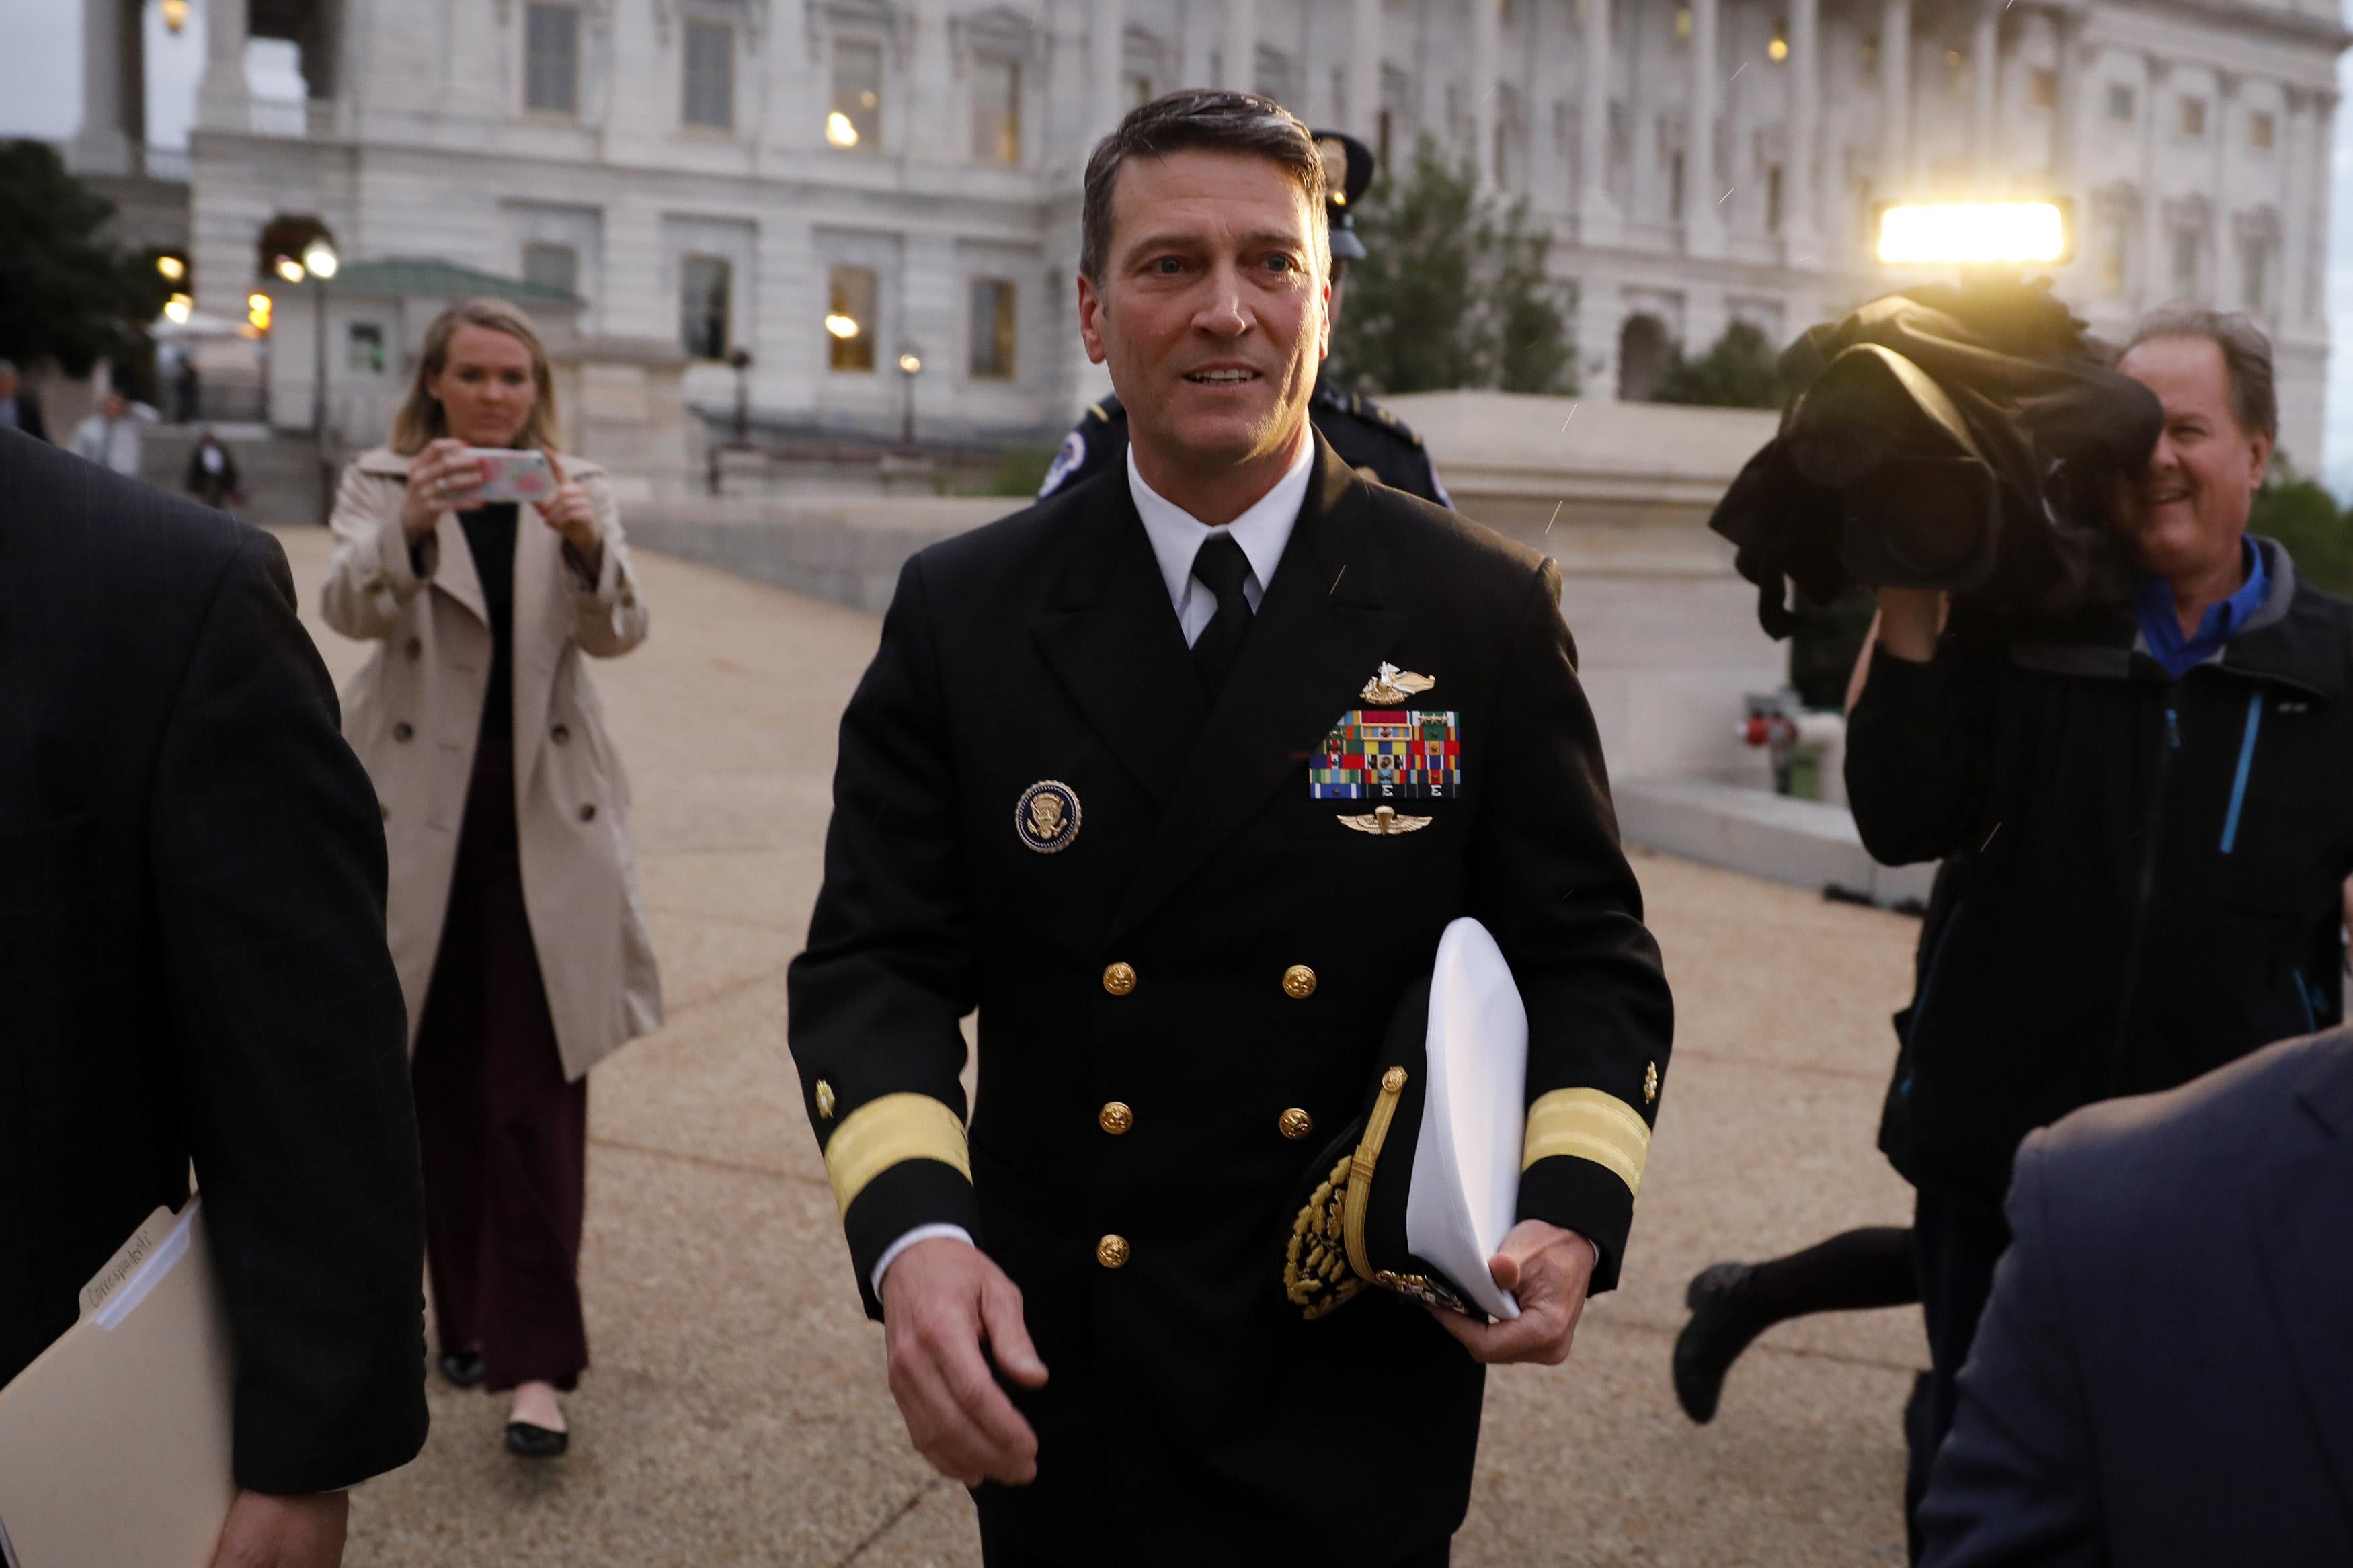 Admiral Ronny Jackson in uniform leaving the U.S. Capitol